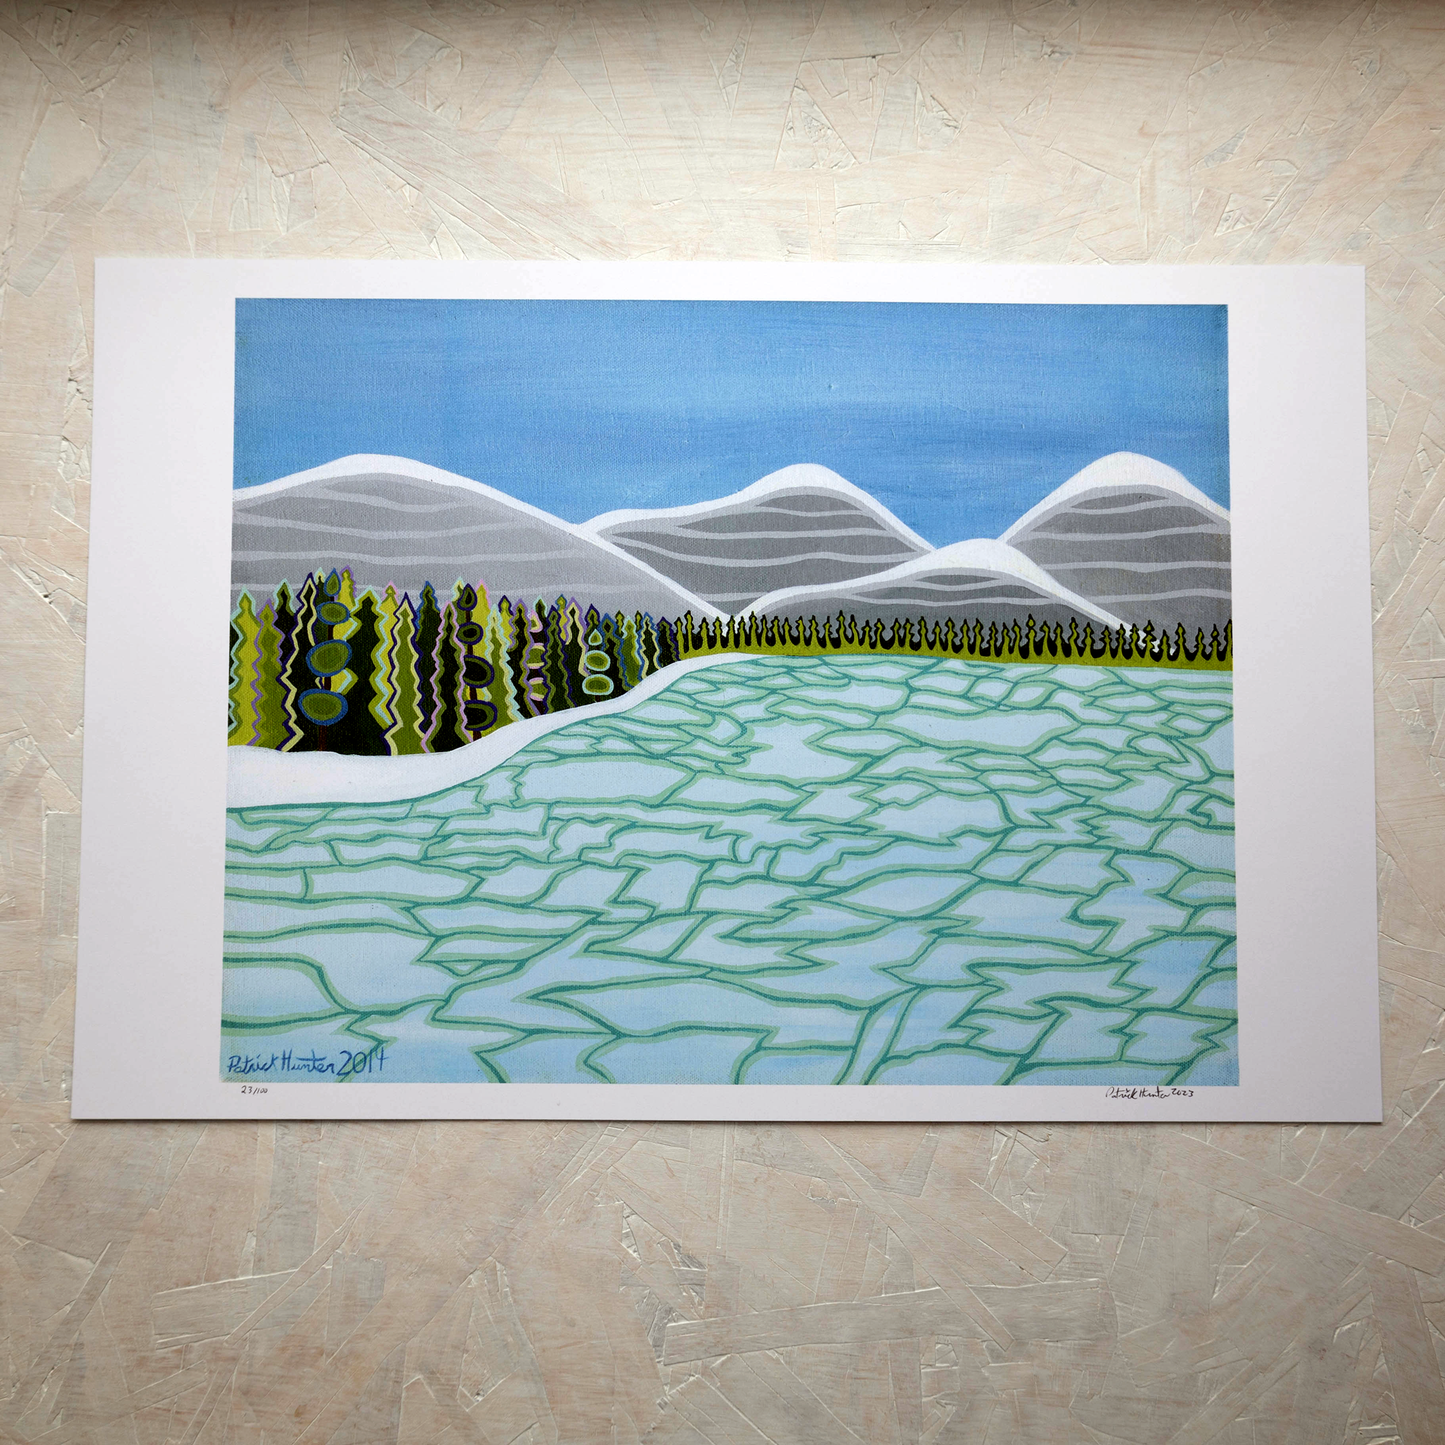 Print of Patrick Hunter's painting of a ice-covered body of water with forest and mountains in the background, woodland art style.